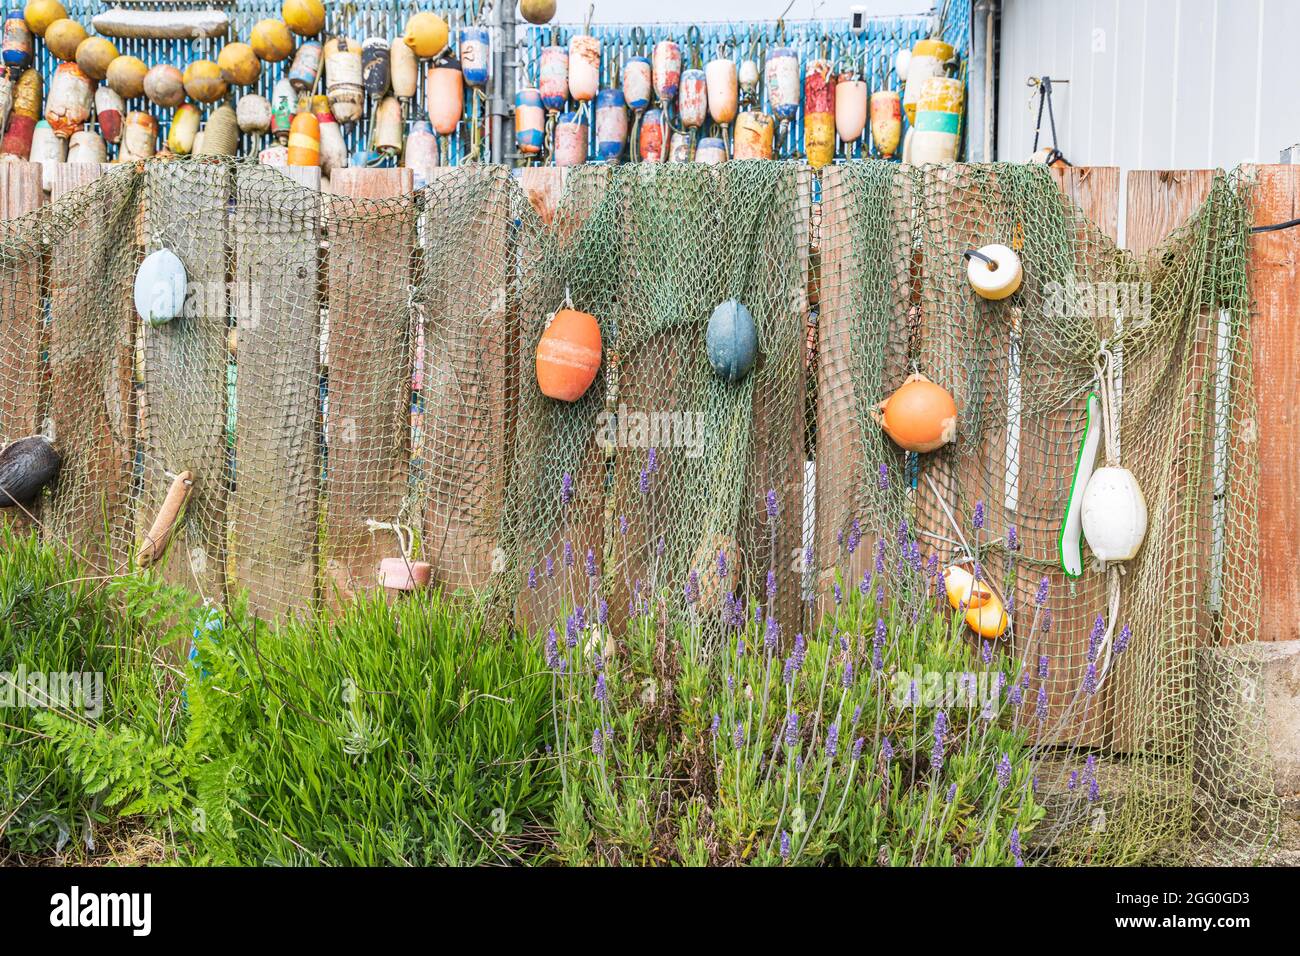 https://c8.alamy.com/comp/2GG0GD3/coos-bay-oregon-usa-fishing-net-and-crab-trap-floats-on-a-fence-2GG0GD3.jpg